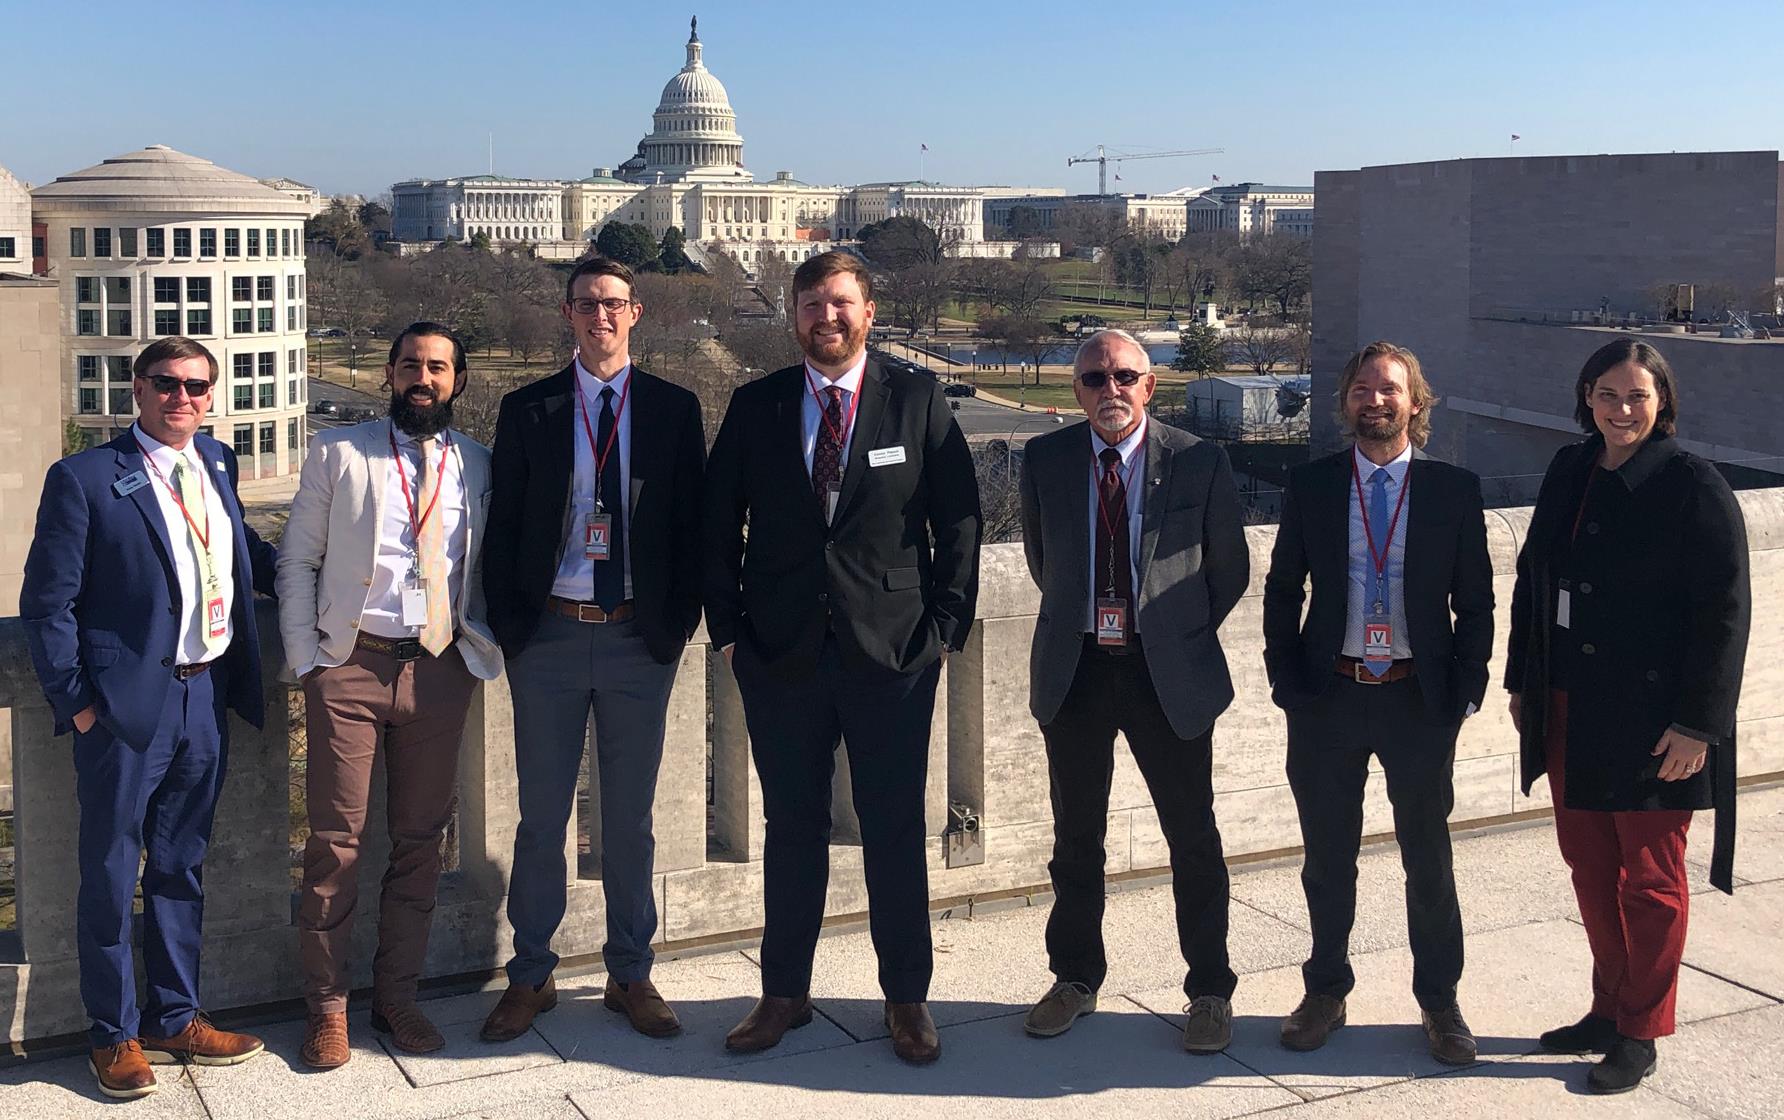 2022-24 Rice Leadership Class on the roof at Canadian Embassy, US Capitol dome in background